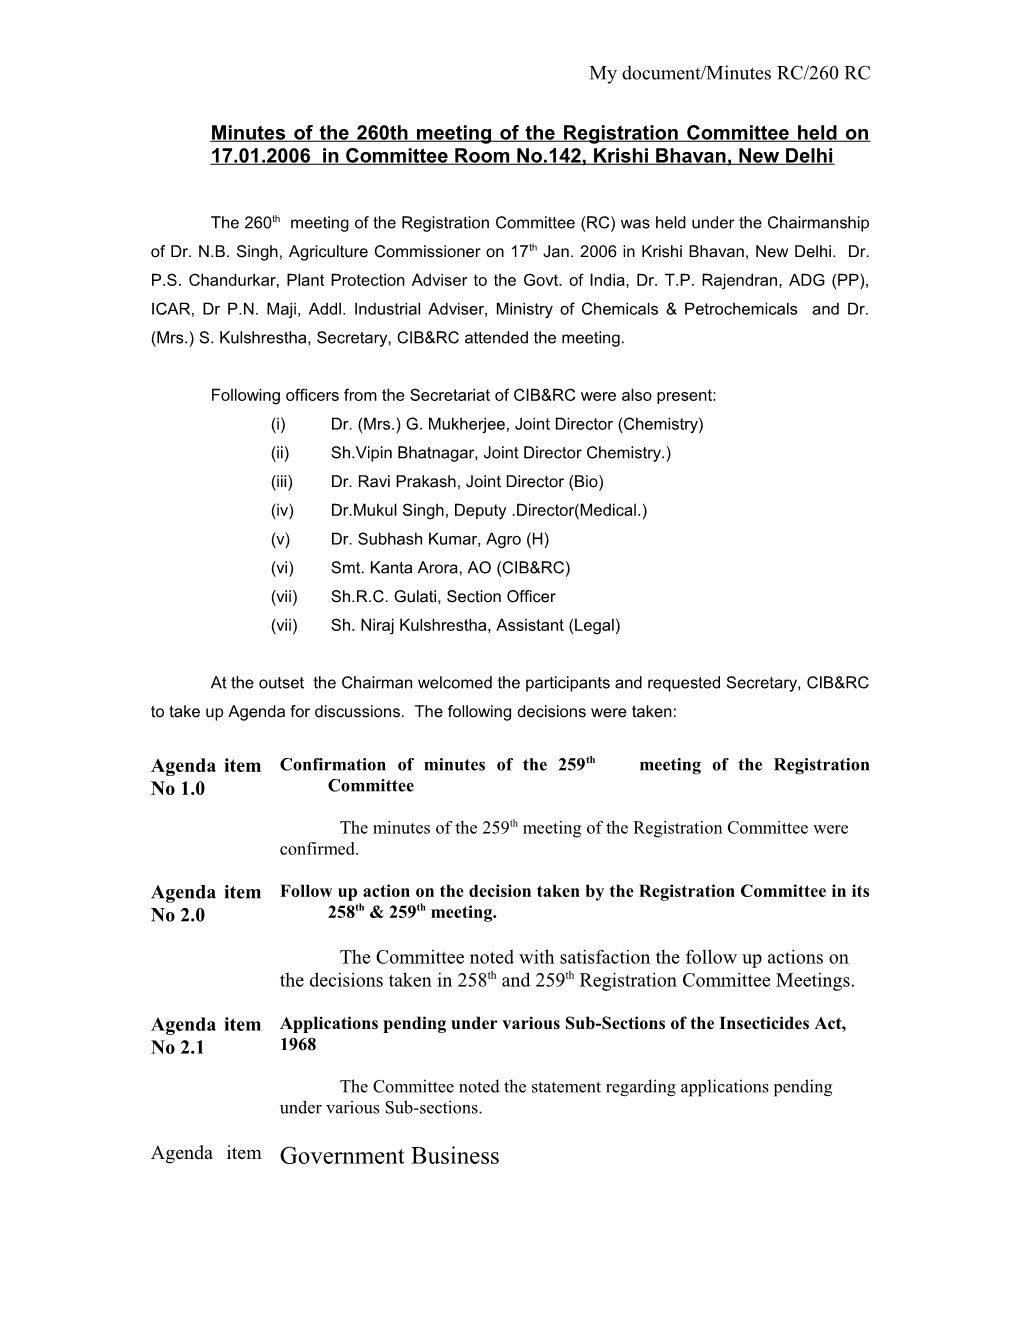 Minutes of the 260Th Meeting of the Registration Committee Held on 17.01.2006 in Committee